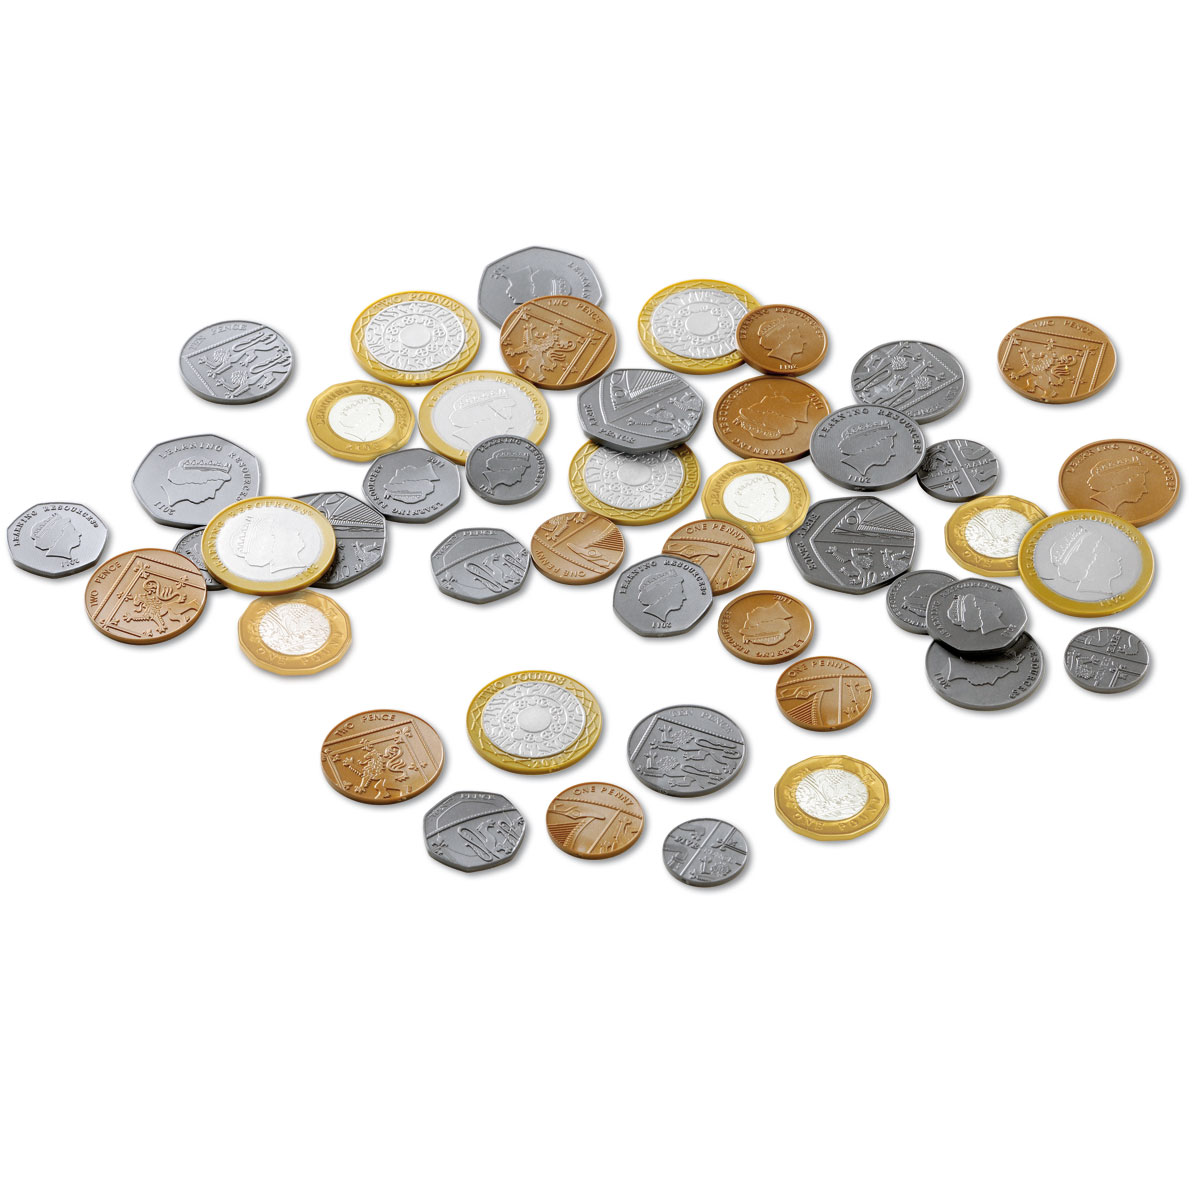 155 pcs Teaching Math or Plastic Coins Set for Counting Realistic Movie Props Coins Credit Debit Cards Checkbook Add-on for Pretend Play Cash Register or Play Store 